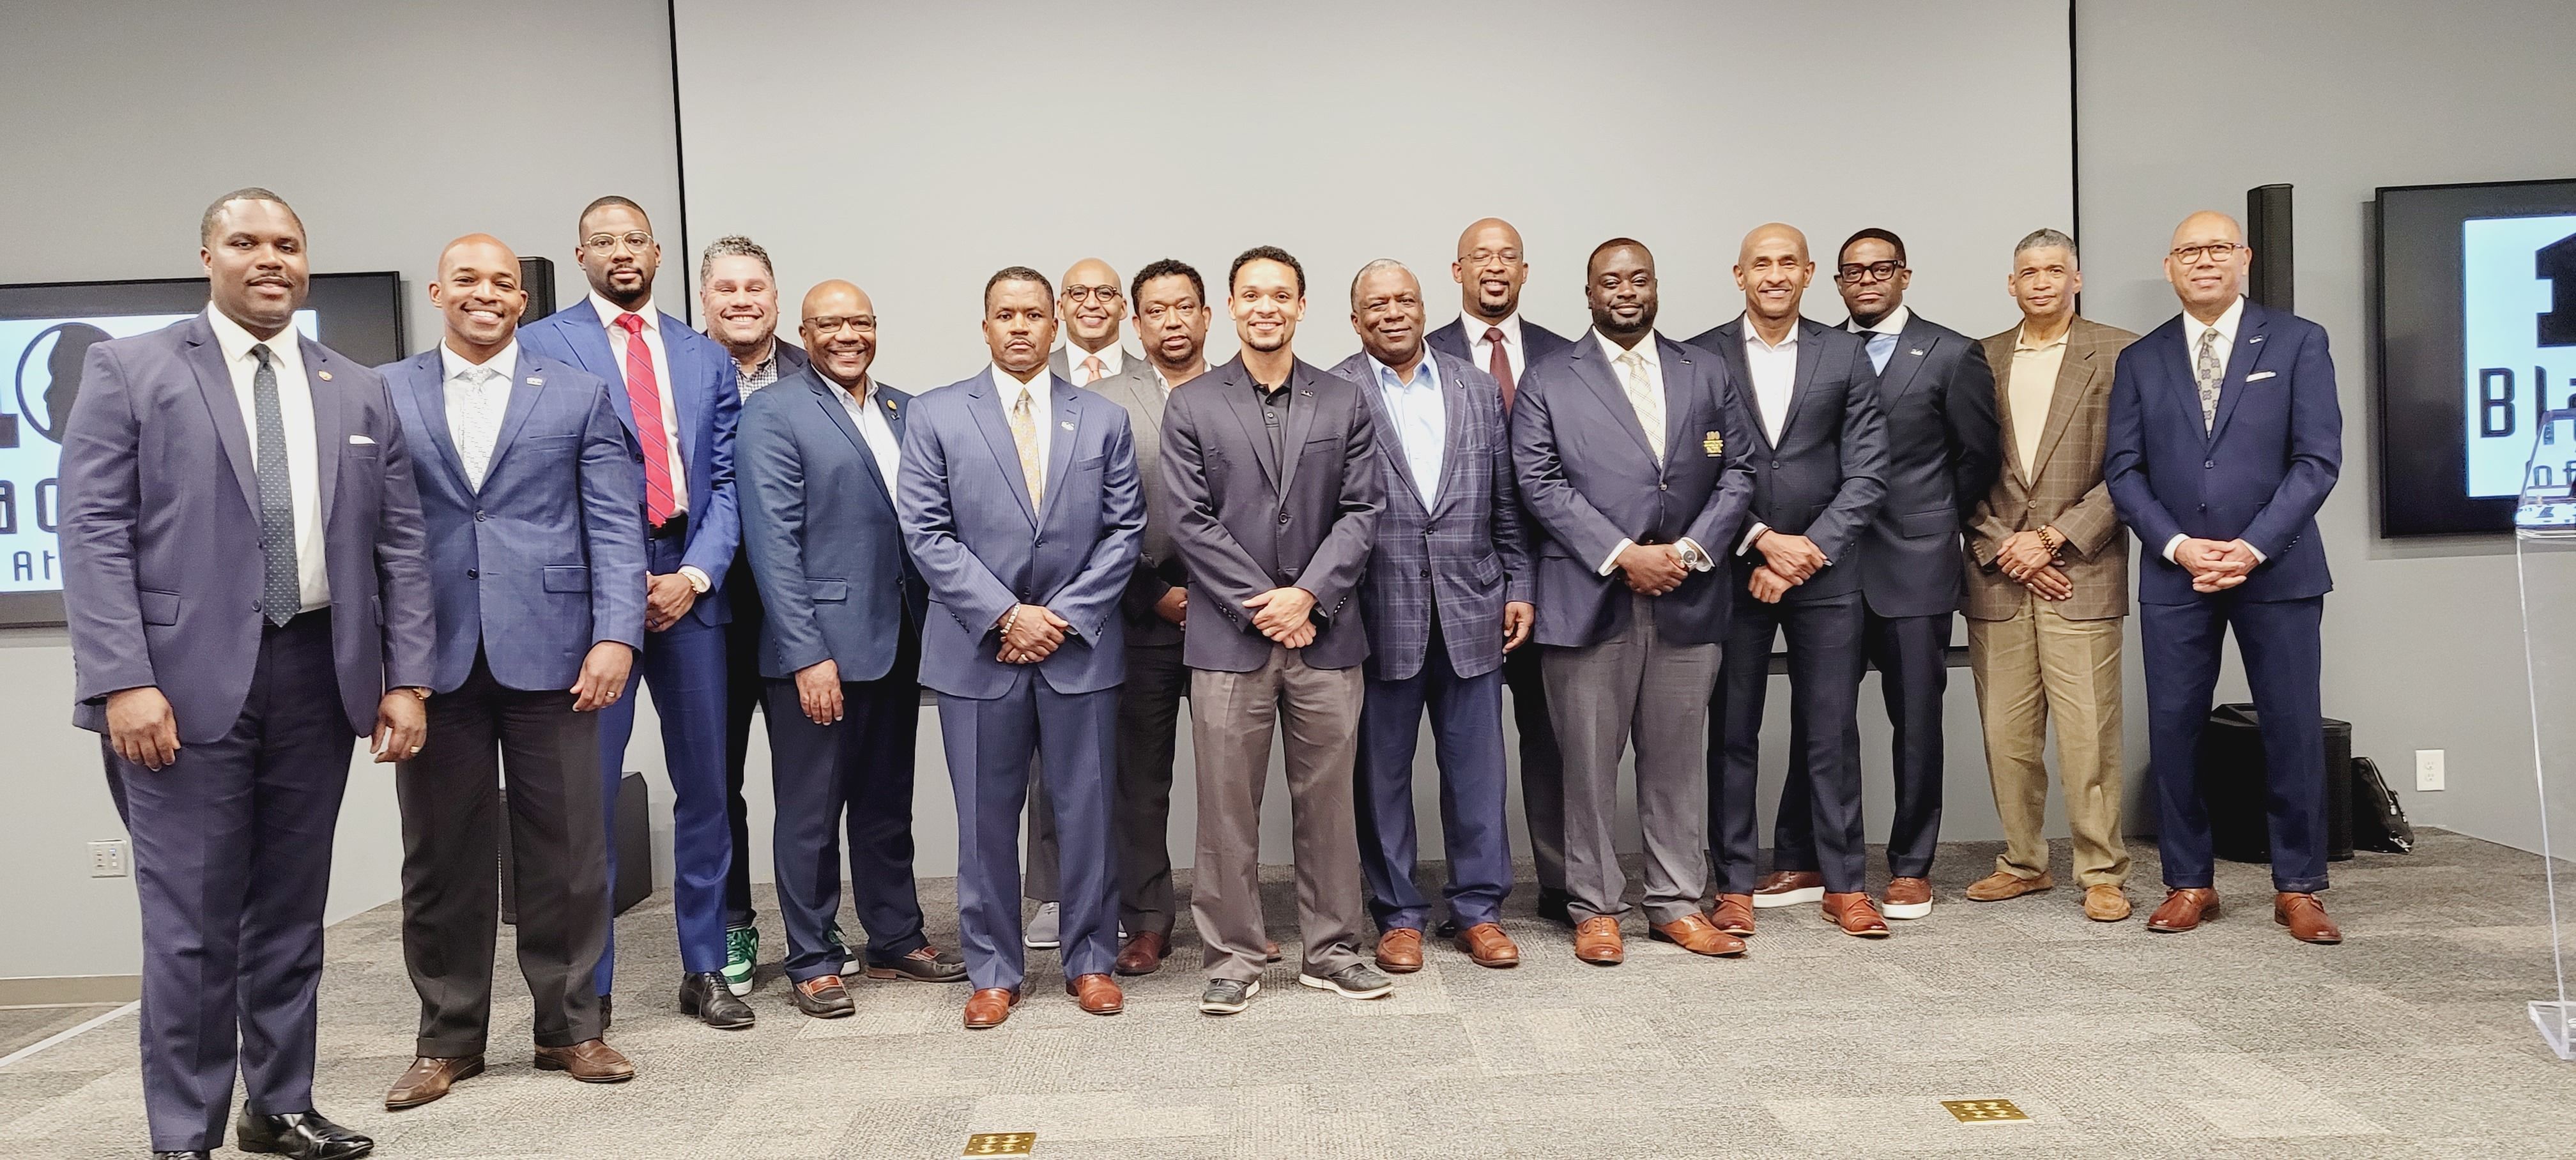 100 Black Men of Atlanta Inducts New Chairman and Board of Directors 